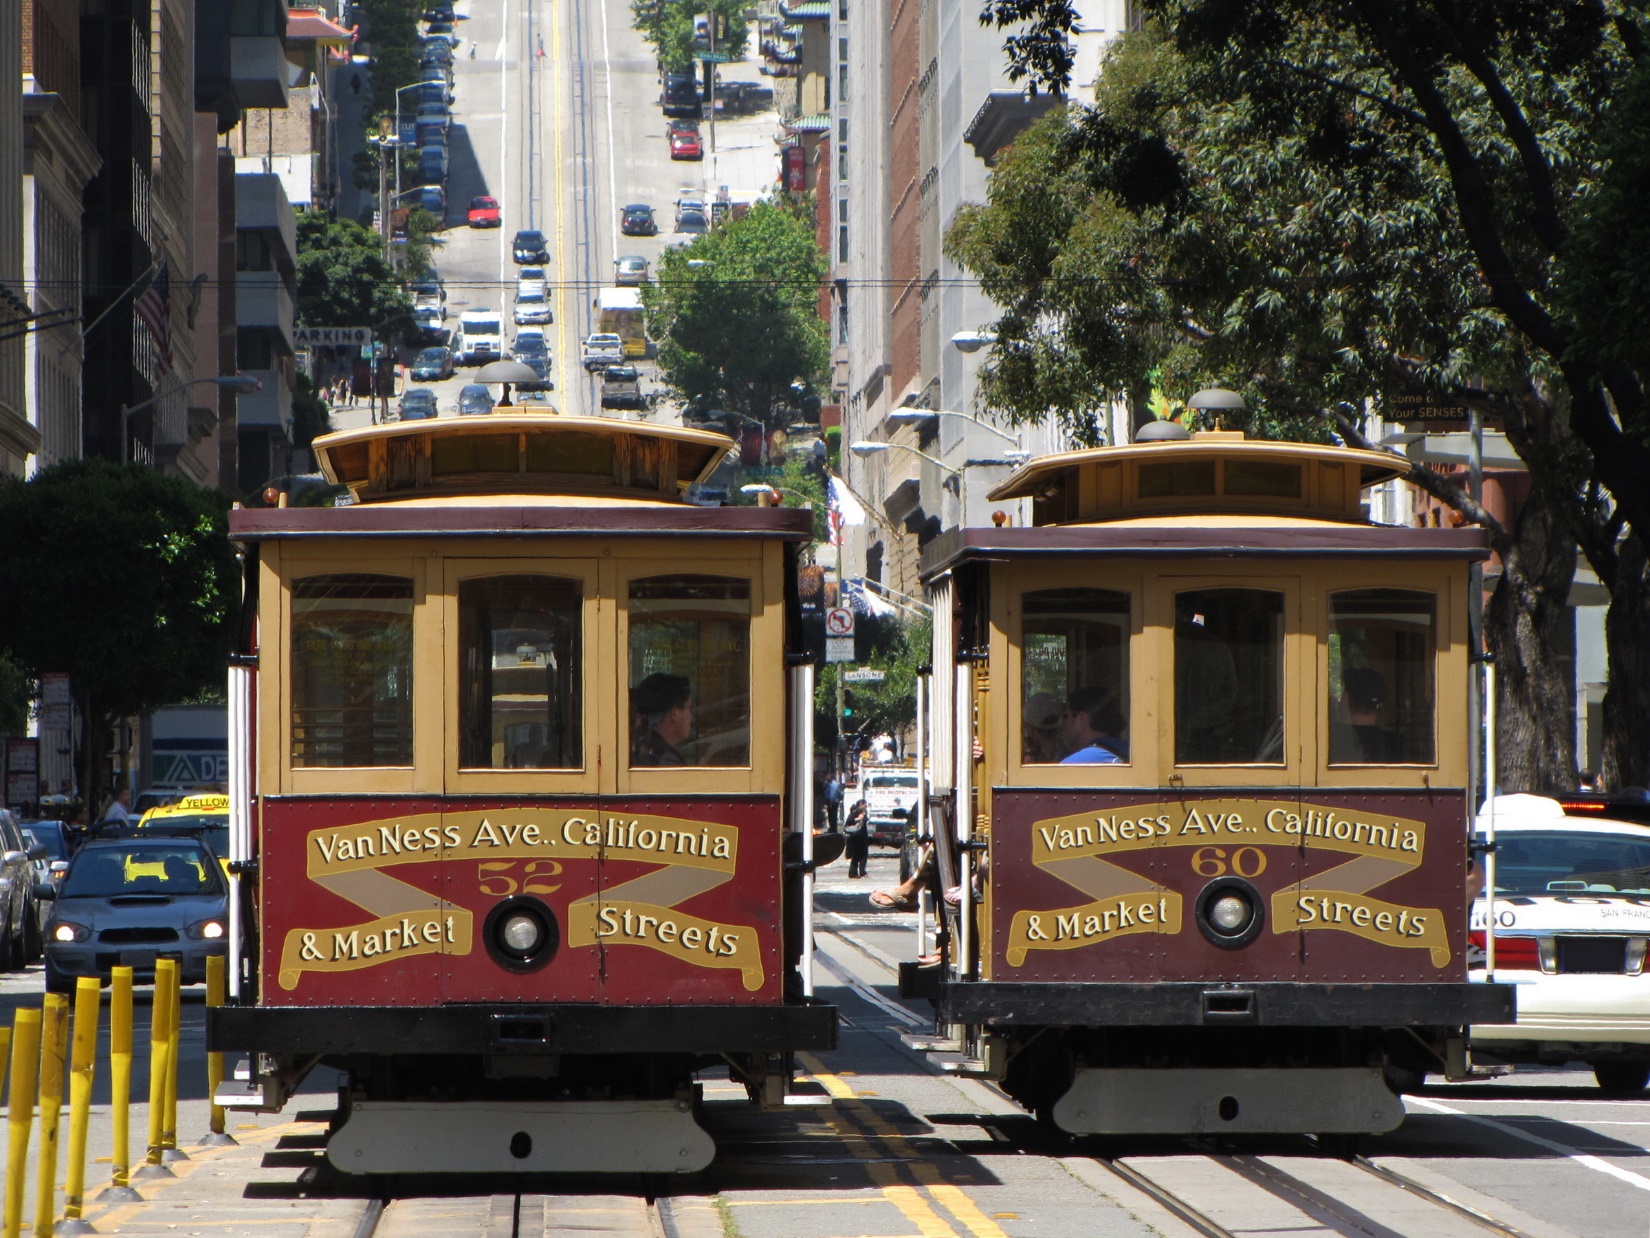 Two trolley cars in San Francisco